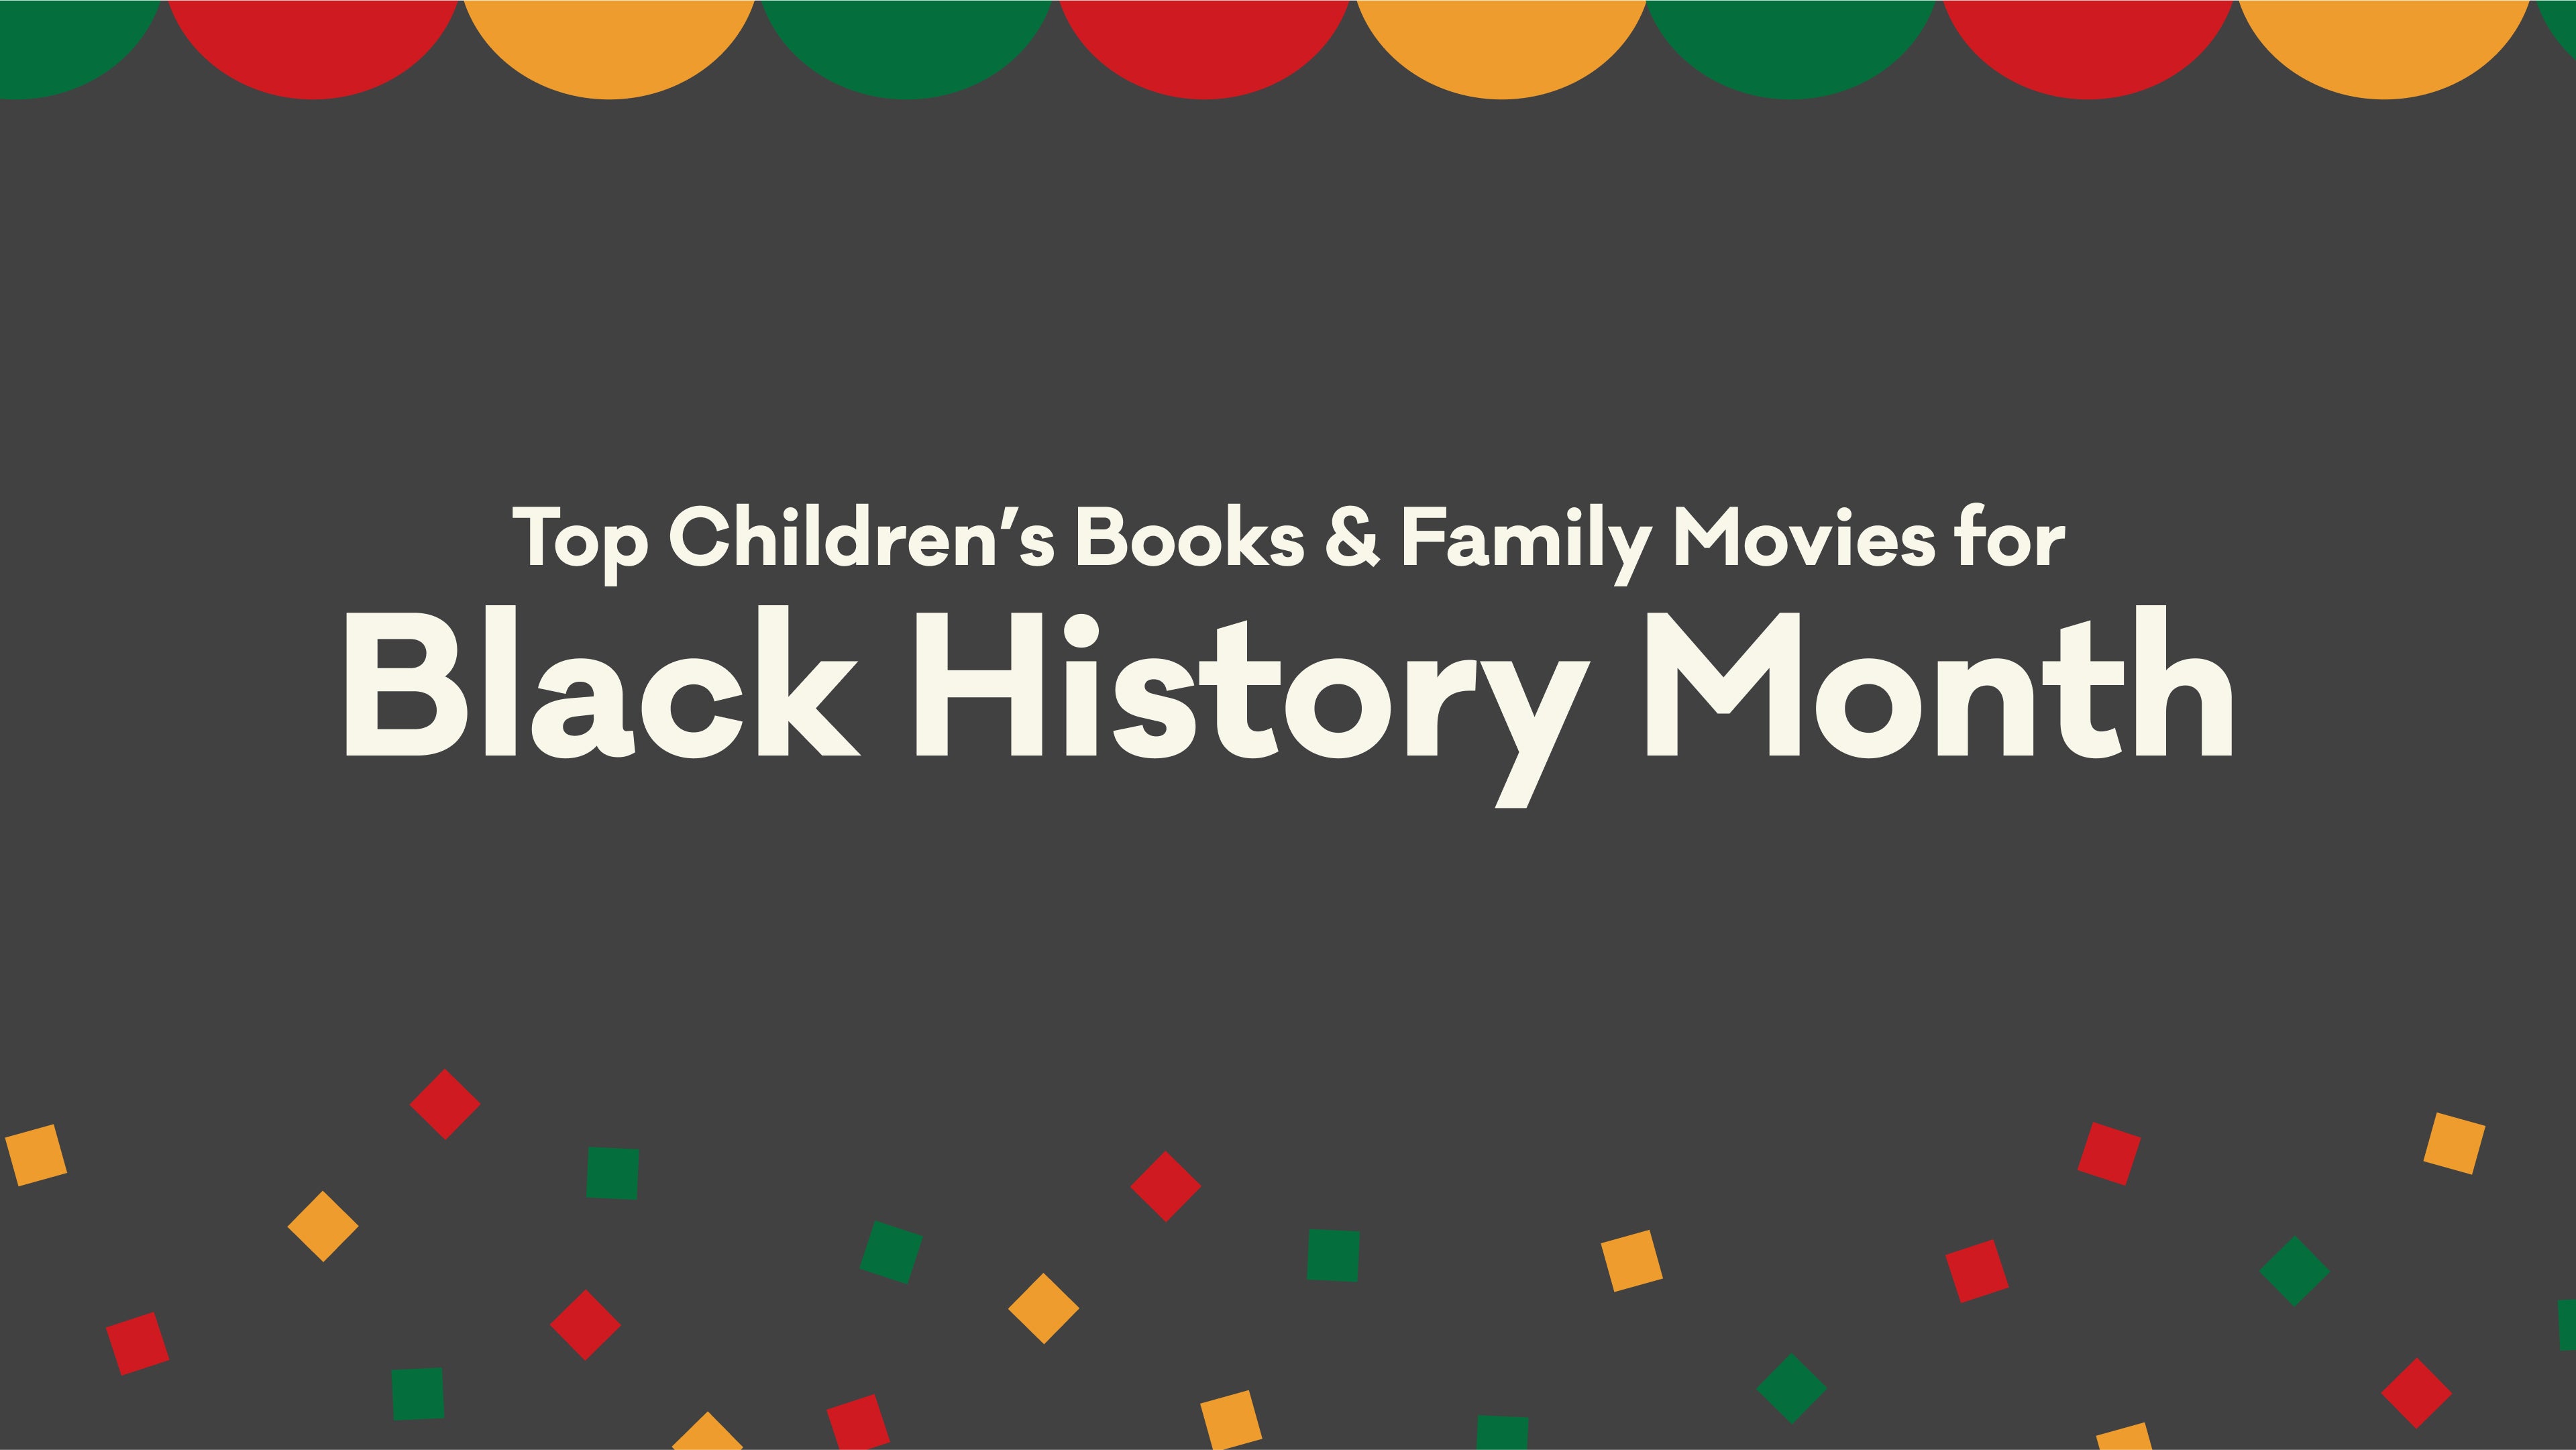 Top Children's Books & Family Movies for Black History Month